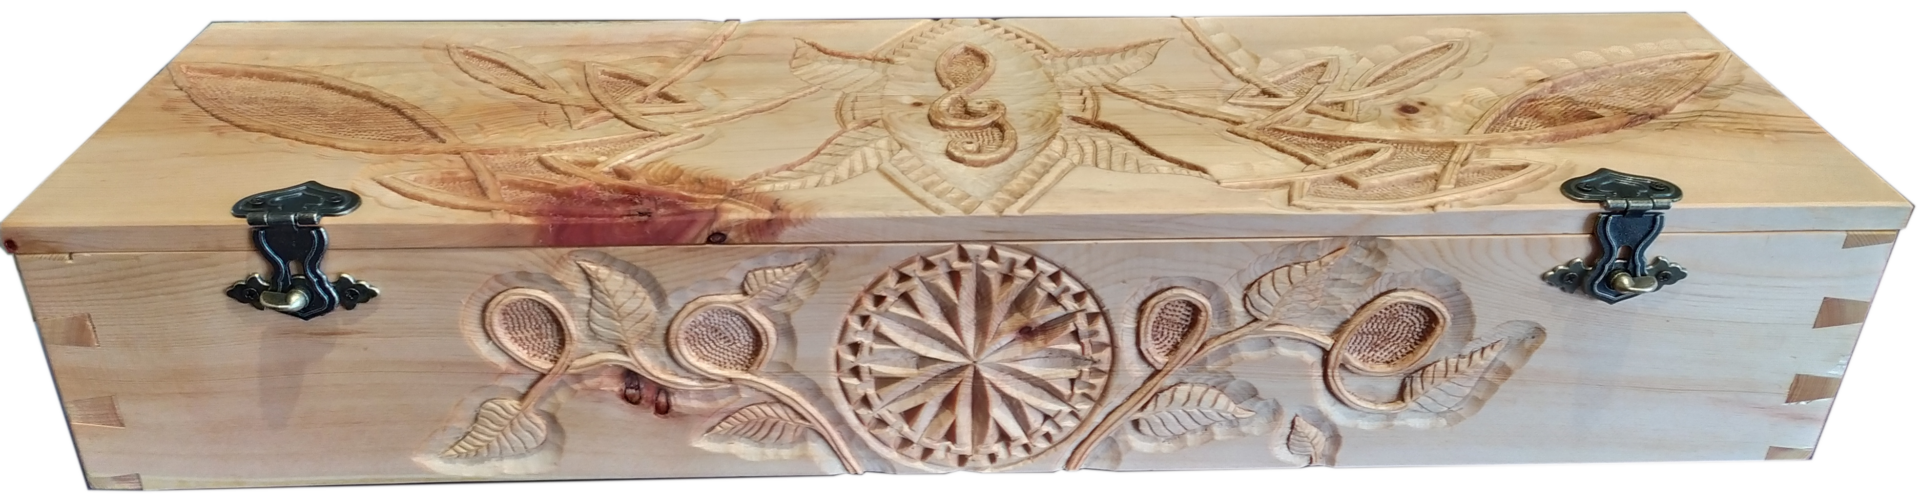 Carved wooden chest for Irish flutes / Tin & Low Whistles. Art patterns from Queyras, Celtic, and Arcane Sculptures inspiration.